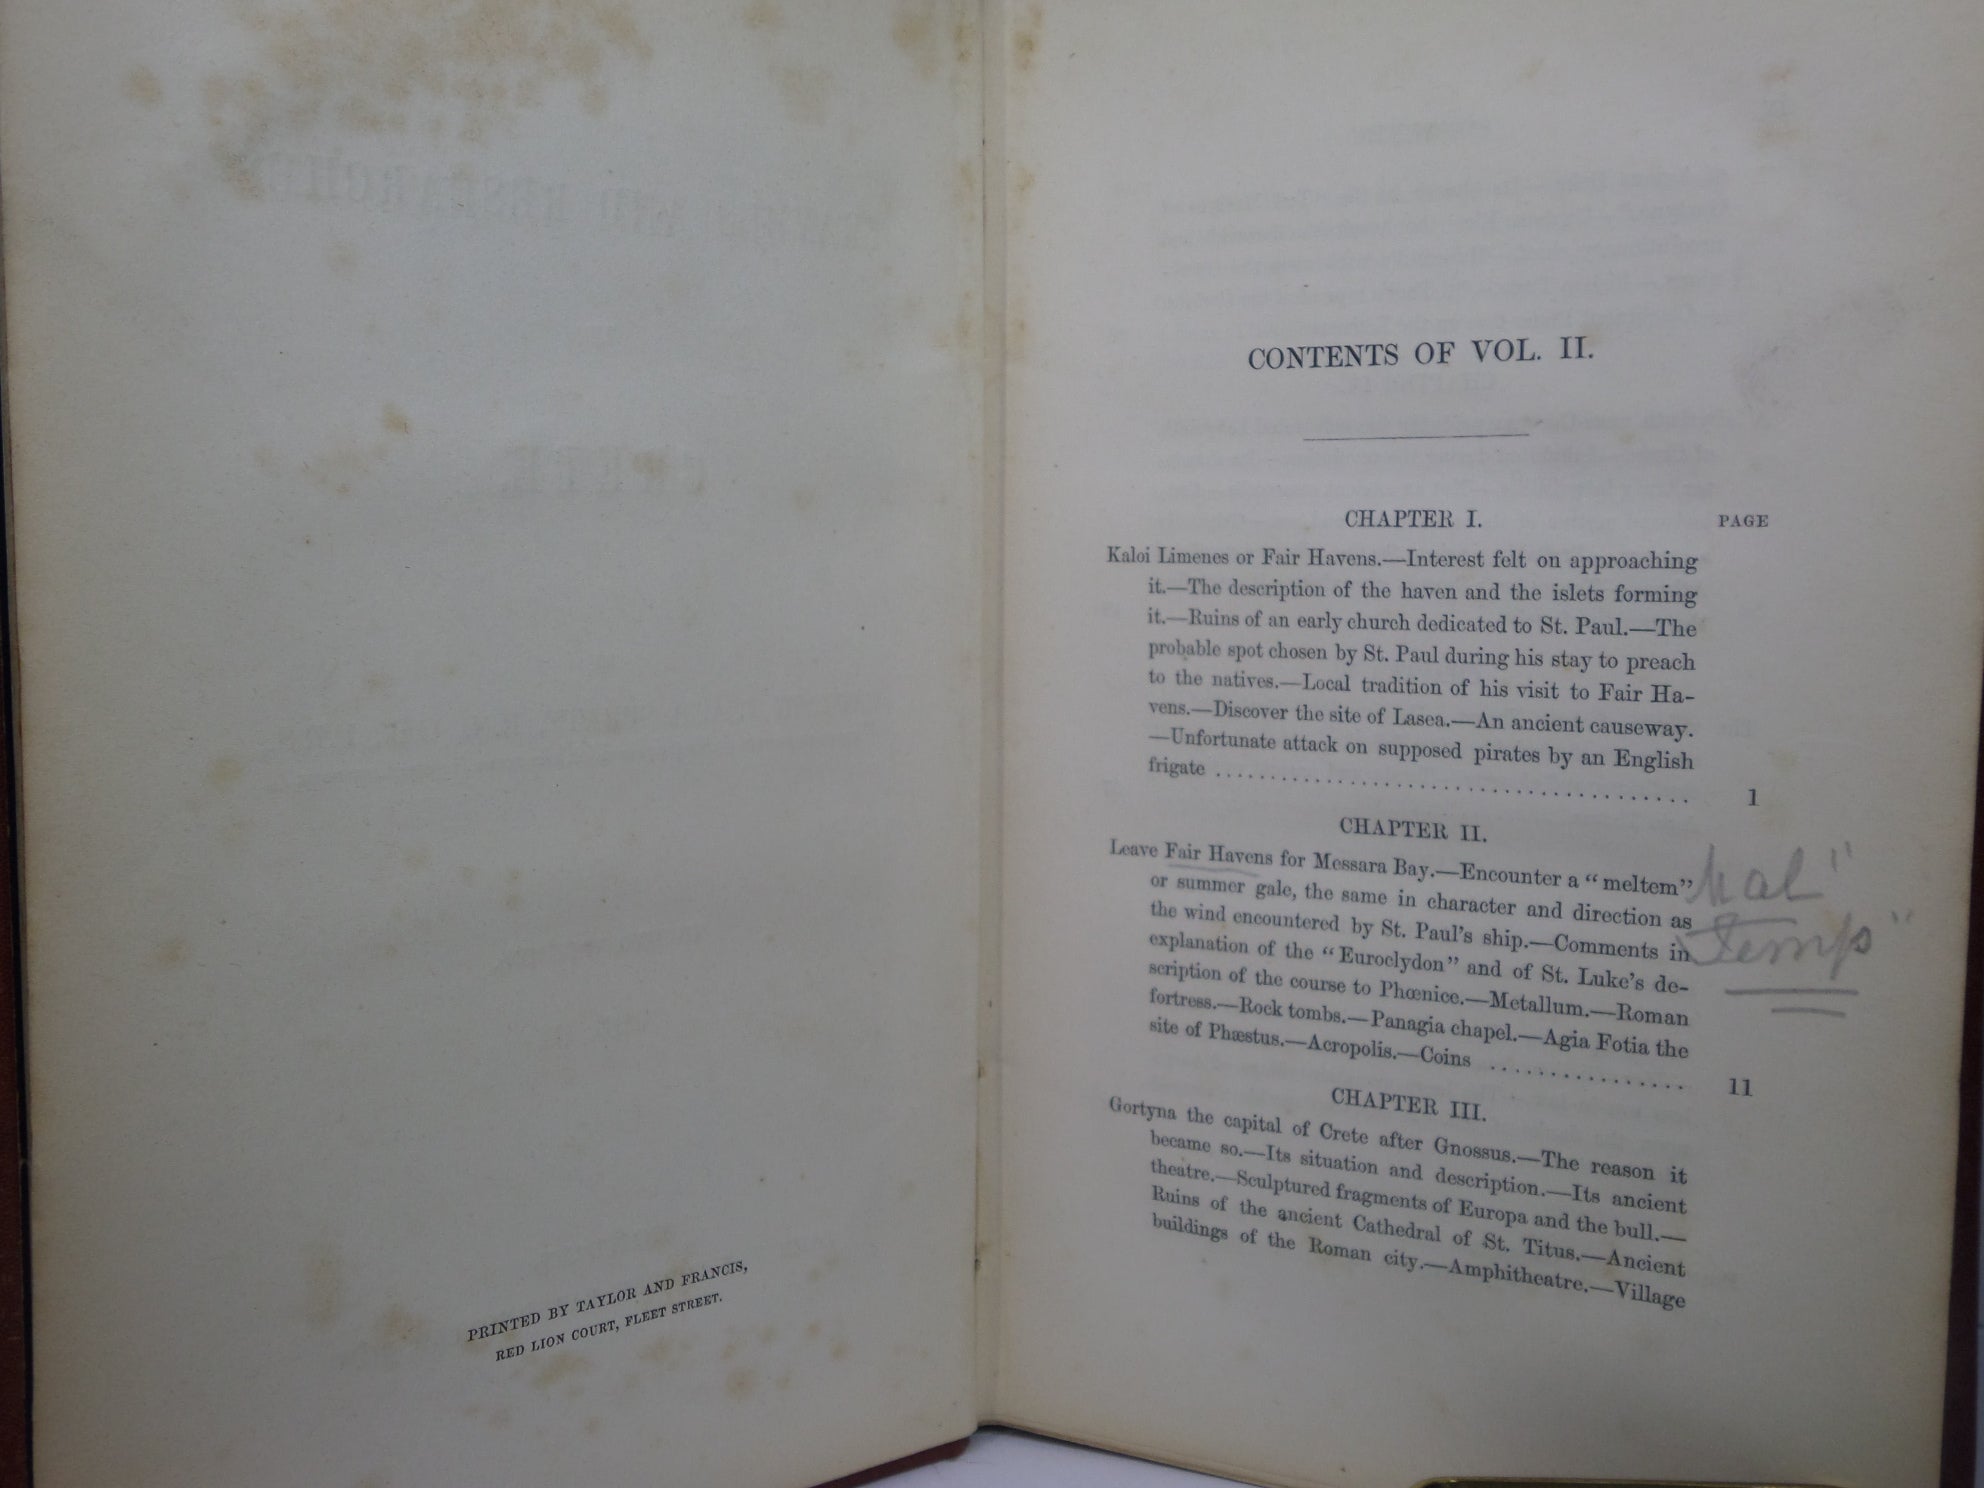 TRAVELS AND RESEARCHES IN CRETE BY T.A.B. SPRATT 1865 FIRST EDITION, AUTHOR'S PRESENTATION COPY